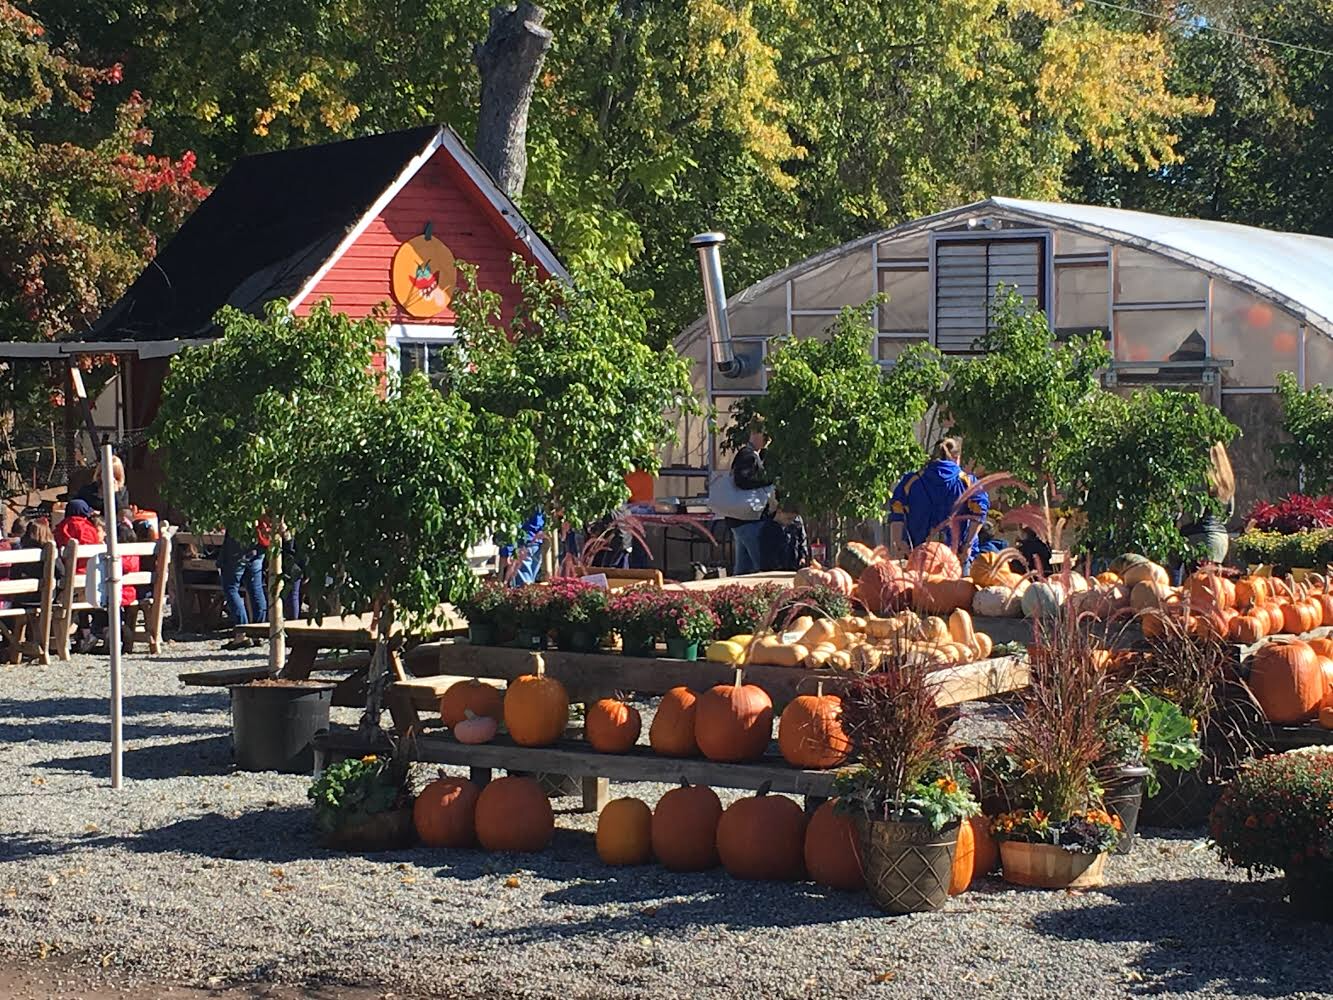 Mums, Pumpkins, Gourds, Deer Resistant Plants, and SO much more! Stop on down!